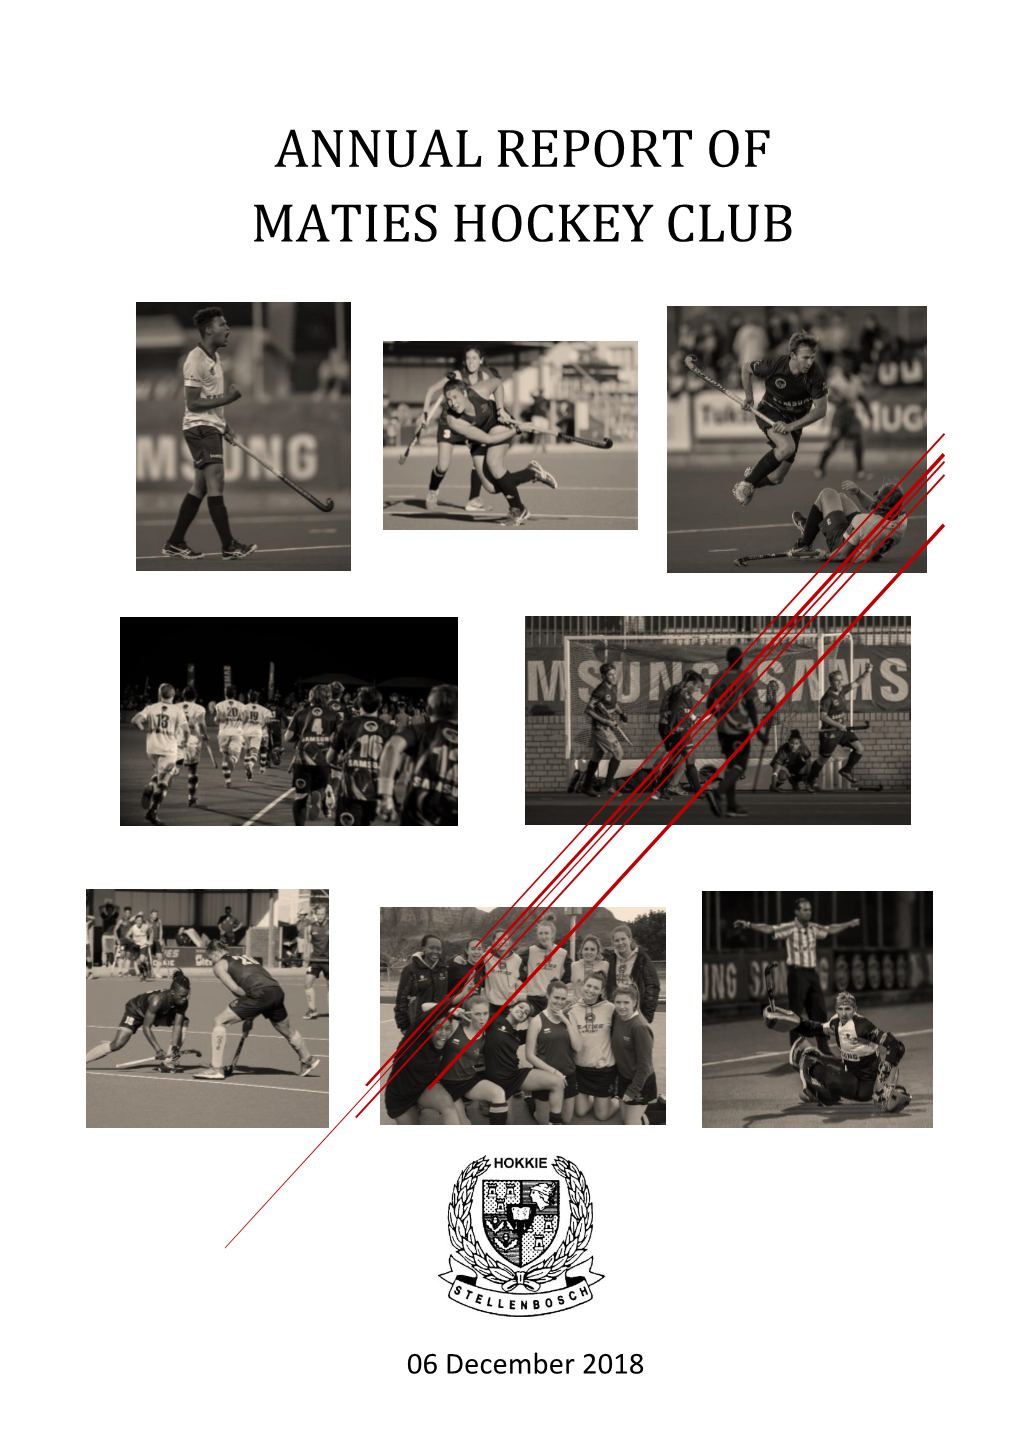 Annual Report of Maties Hockey Club